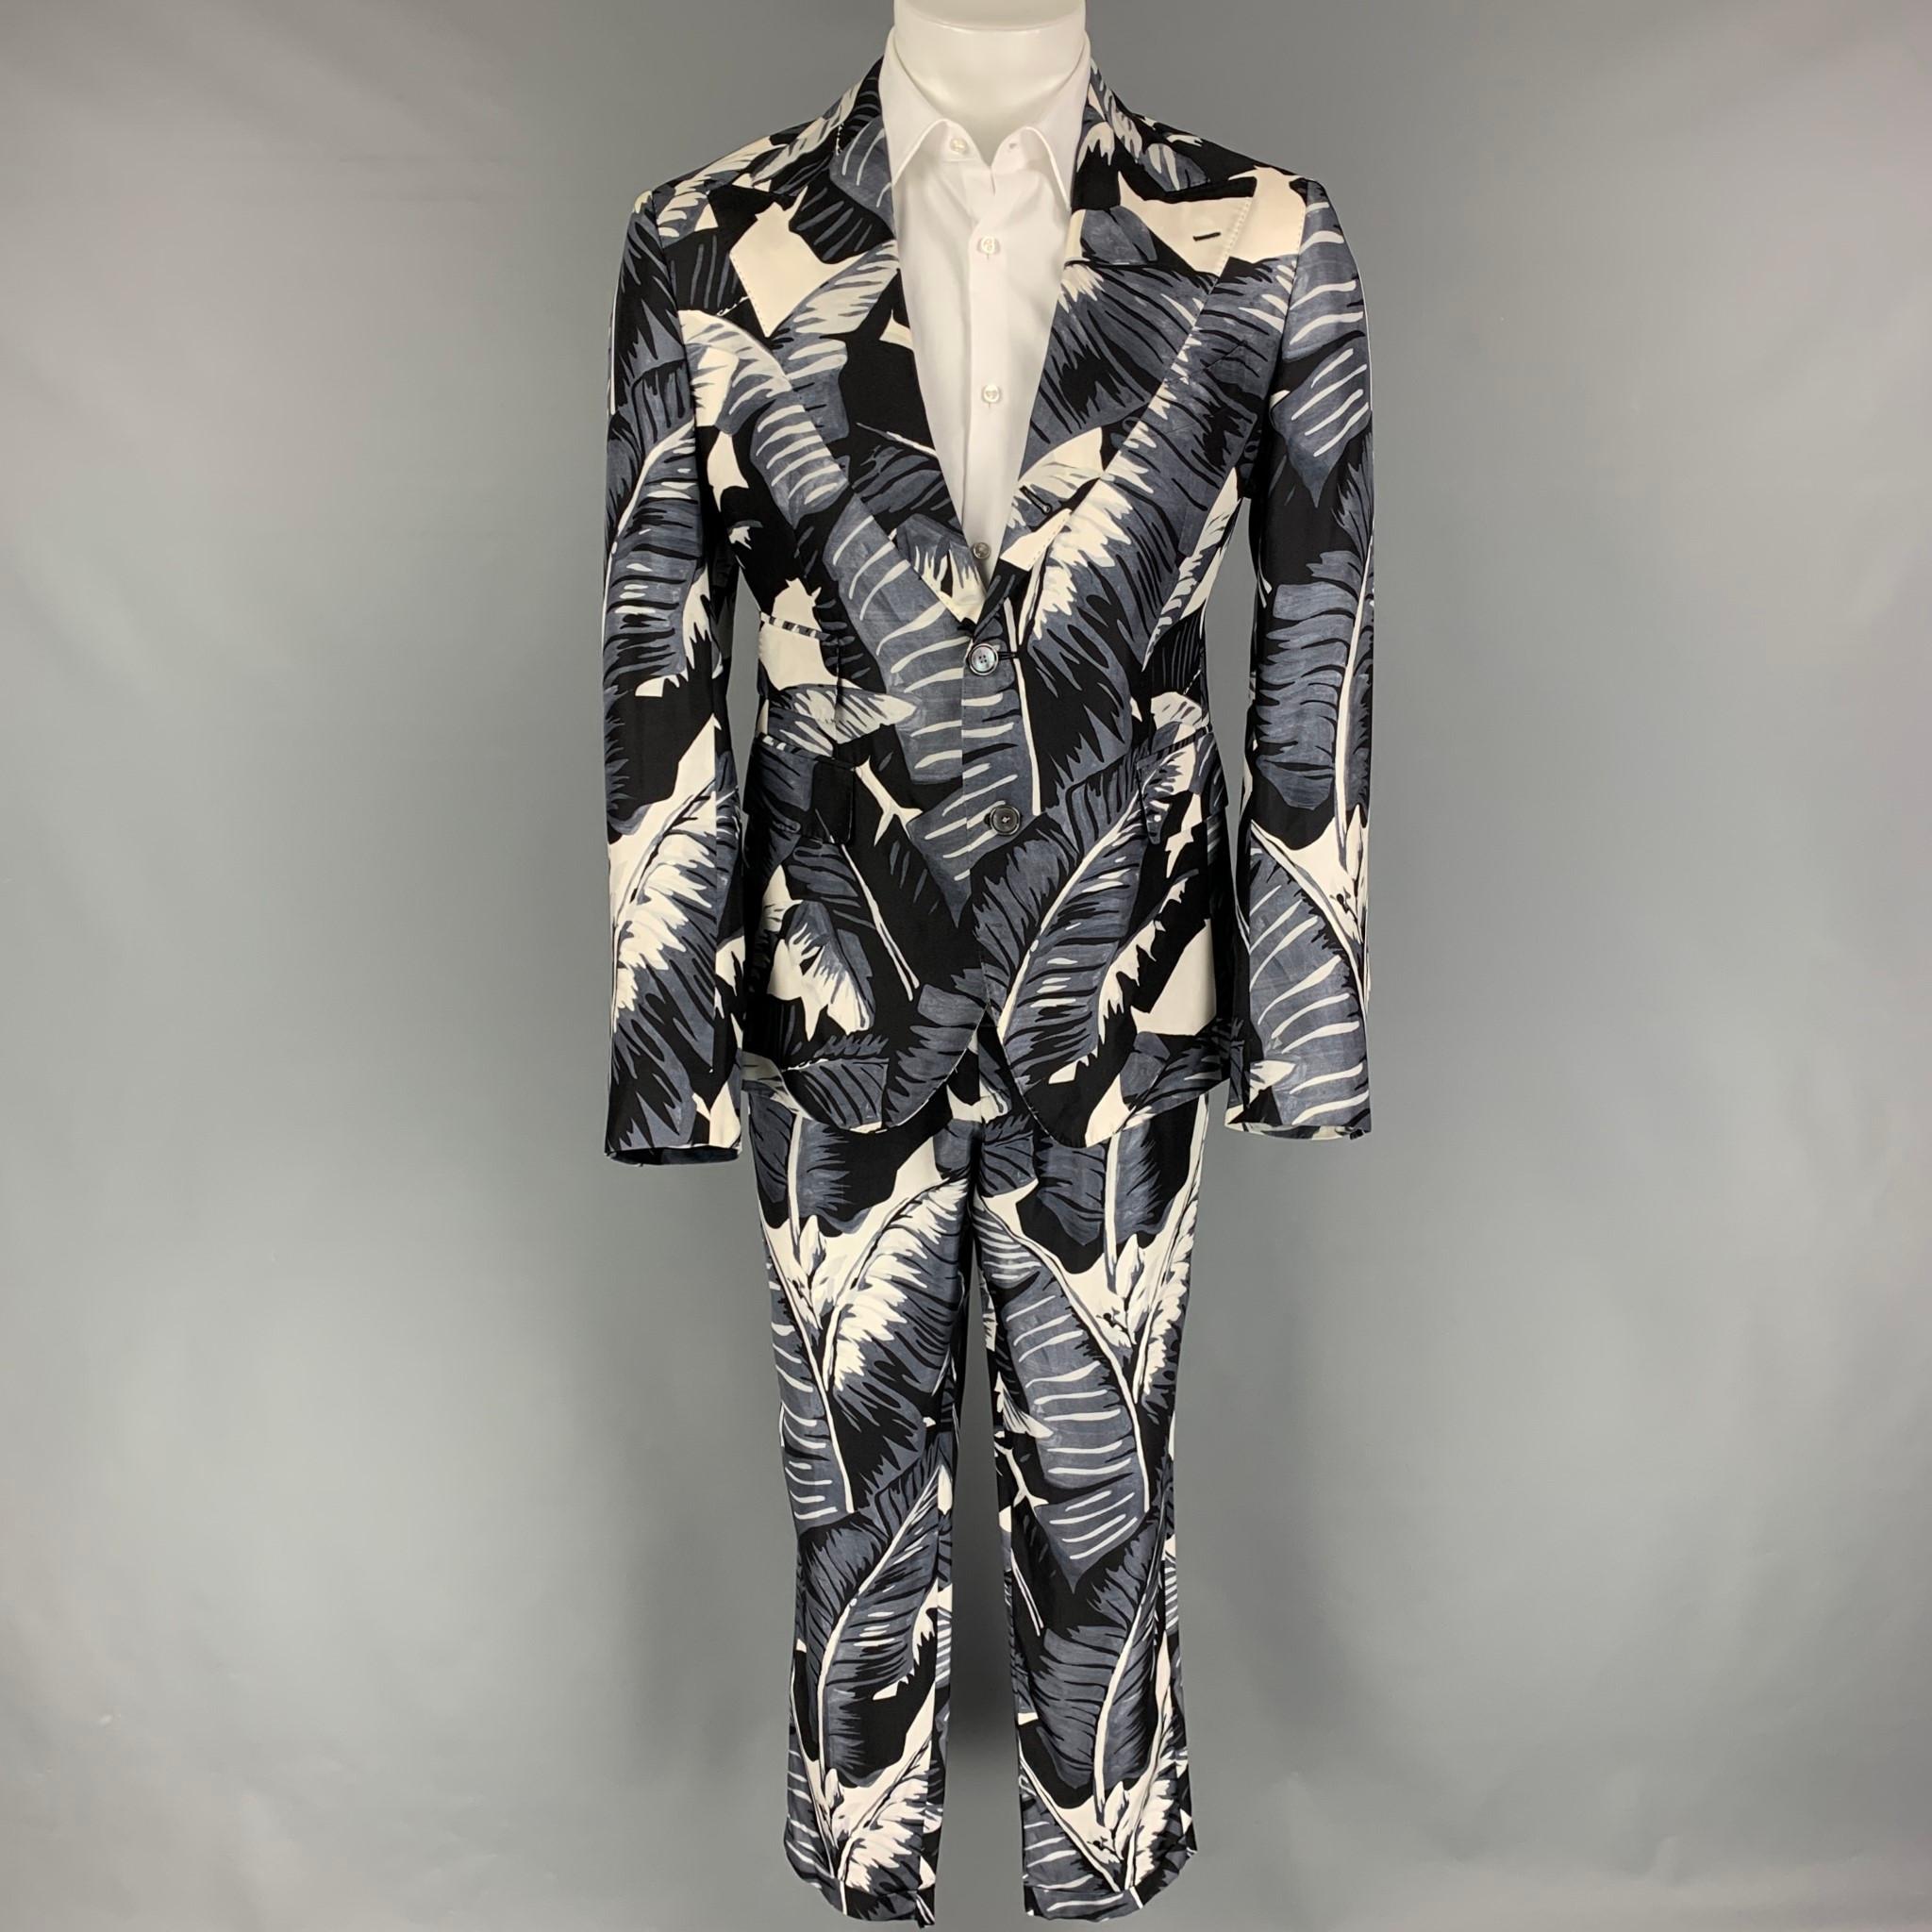 DOLCE & GABBANA suit comes in a blue & white hawaiian print silk and includes a single breasted, double button sport coat with a peak lapel and matching flat front trousers. Made in Italy.

Very Good Pre-Owned Condition.
Marked: